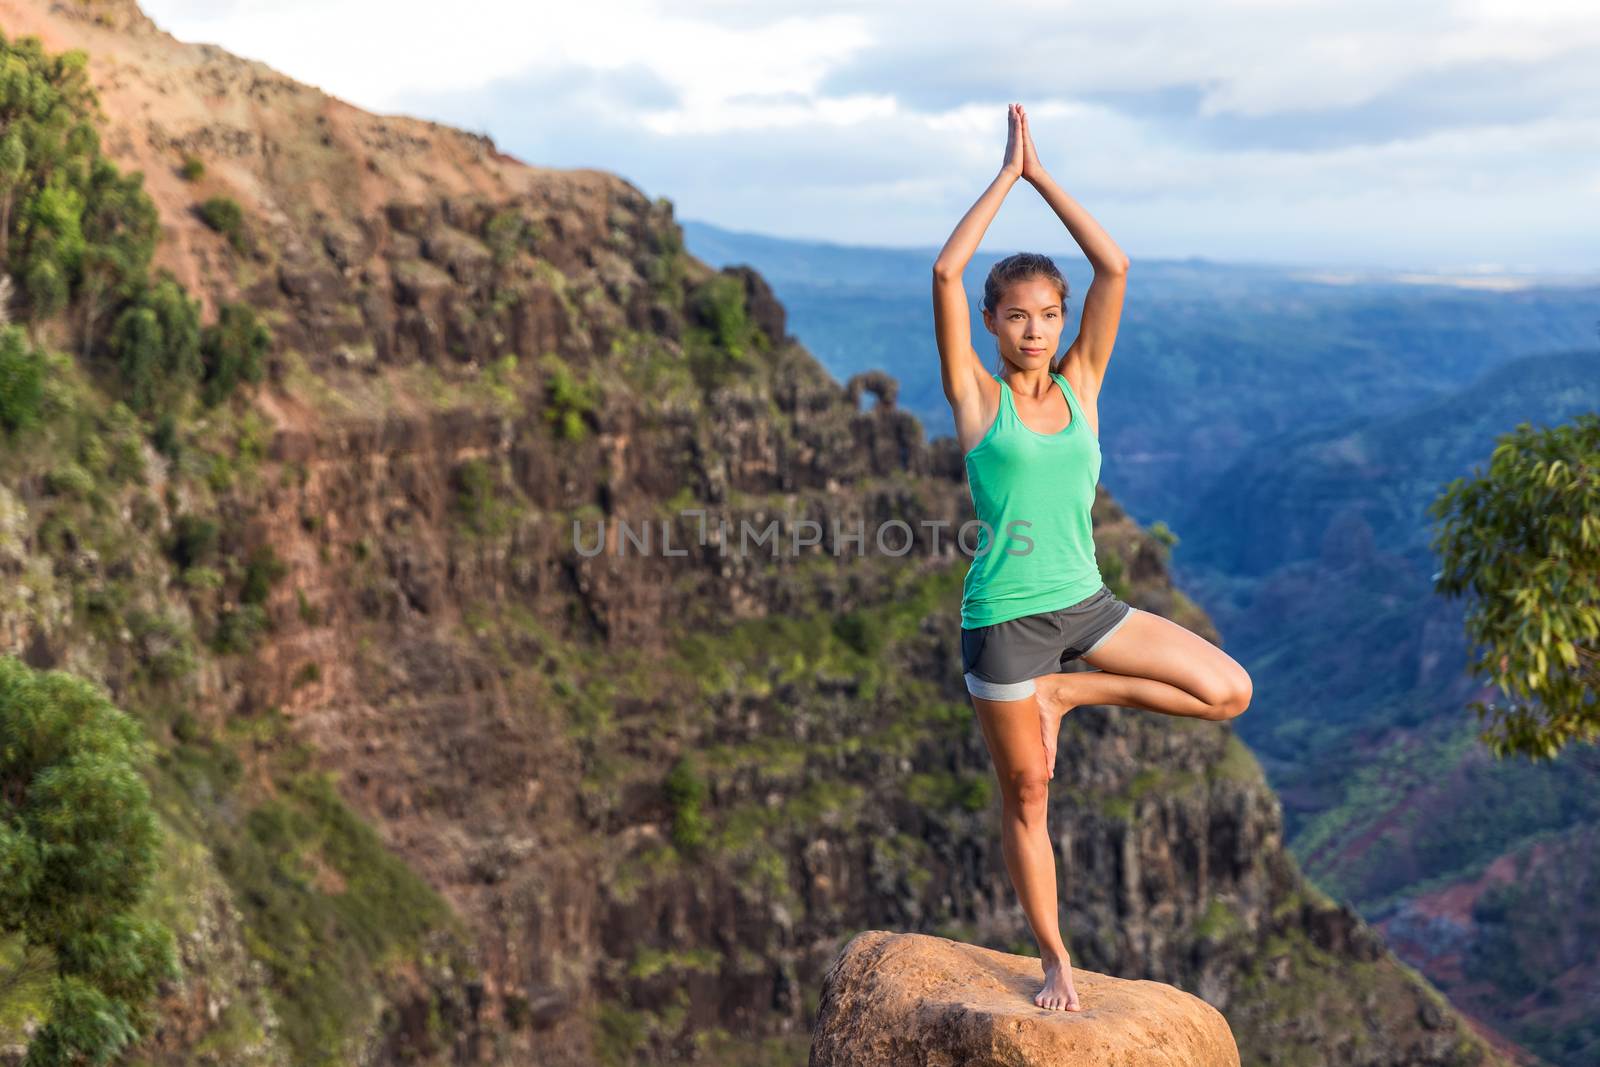 Woman doing yoga in Hawaii mountains. Asian girl meditating in tree pose with praying hands above head standing on one leg in Kauai, Hawaii, USA. girl in serene nature landscape.